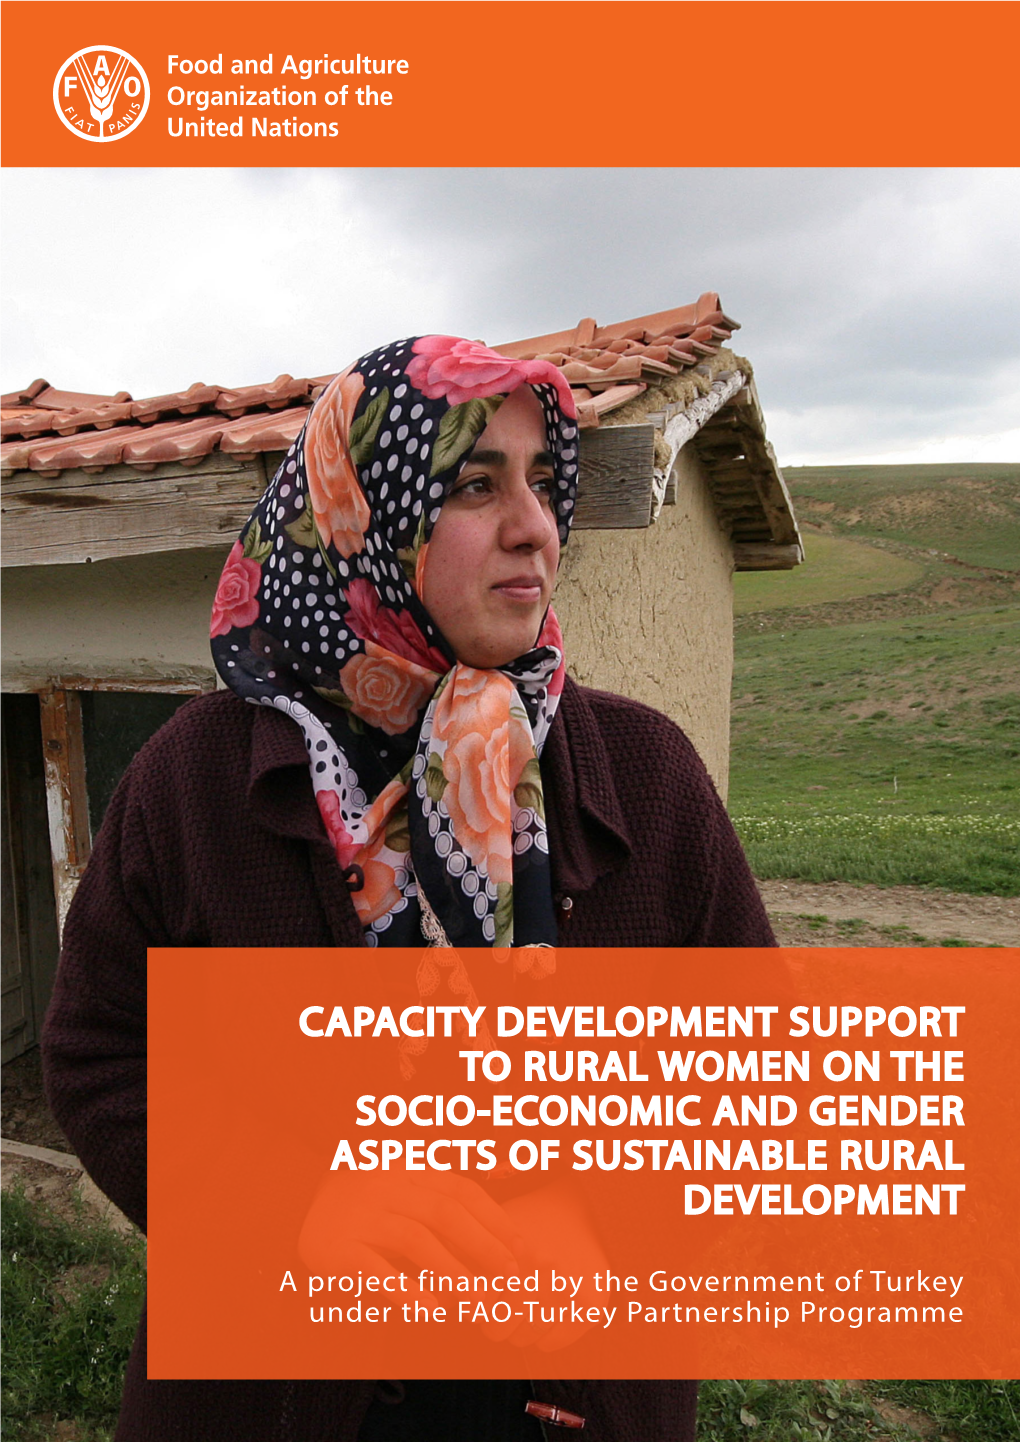 Capacity Development Support to Rural Women on the Socio-Economic and Gender Aspects of Sustainable Rural Development